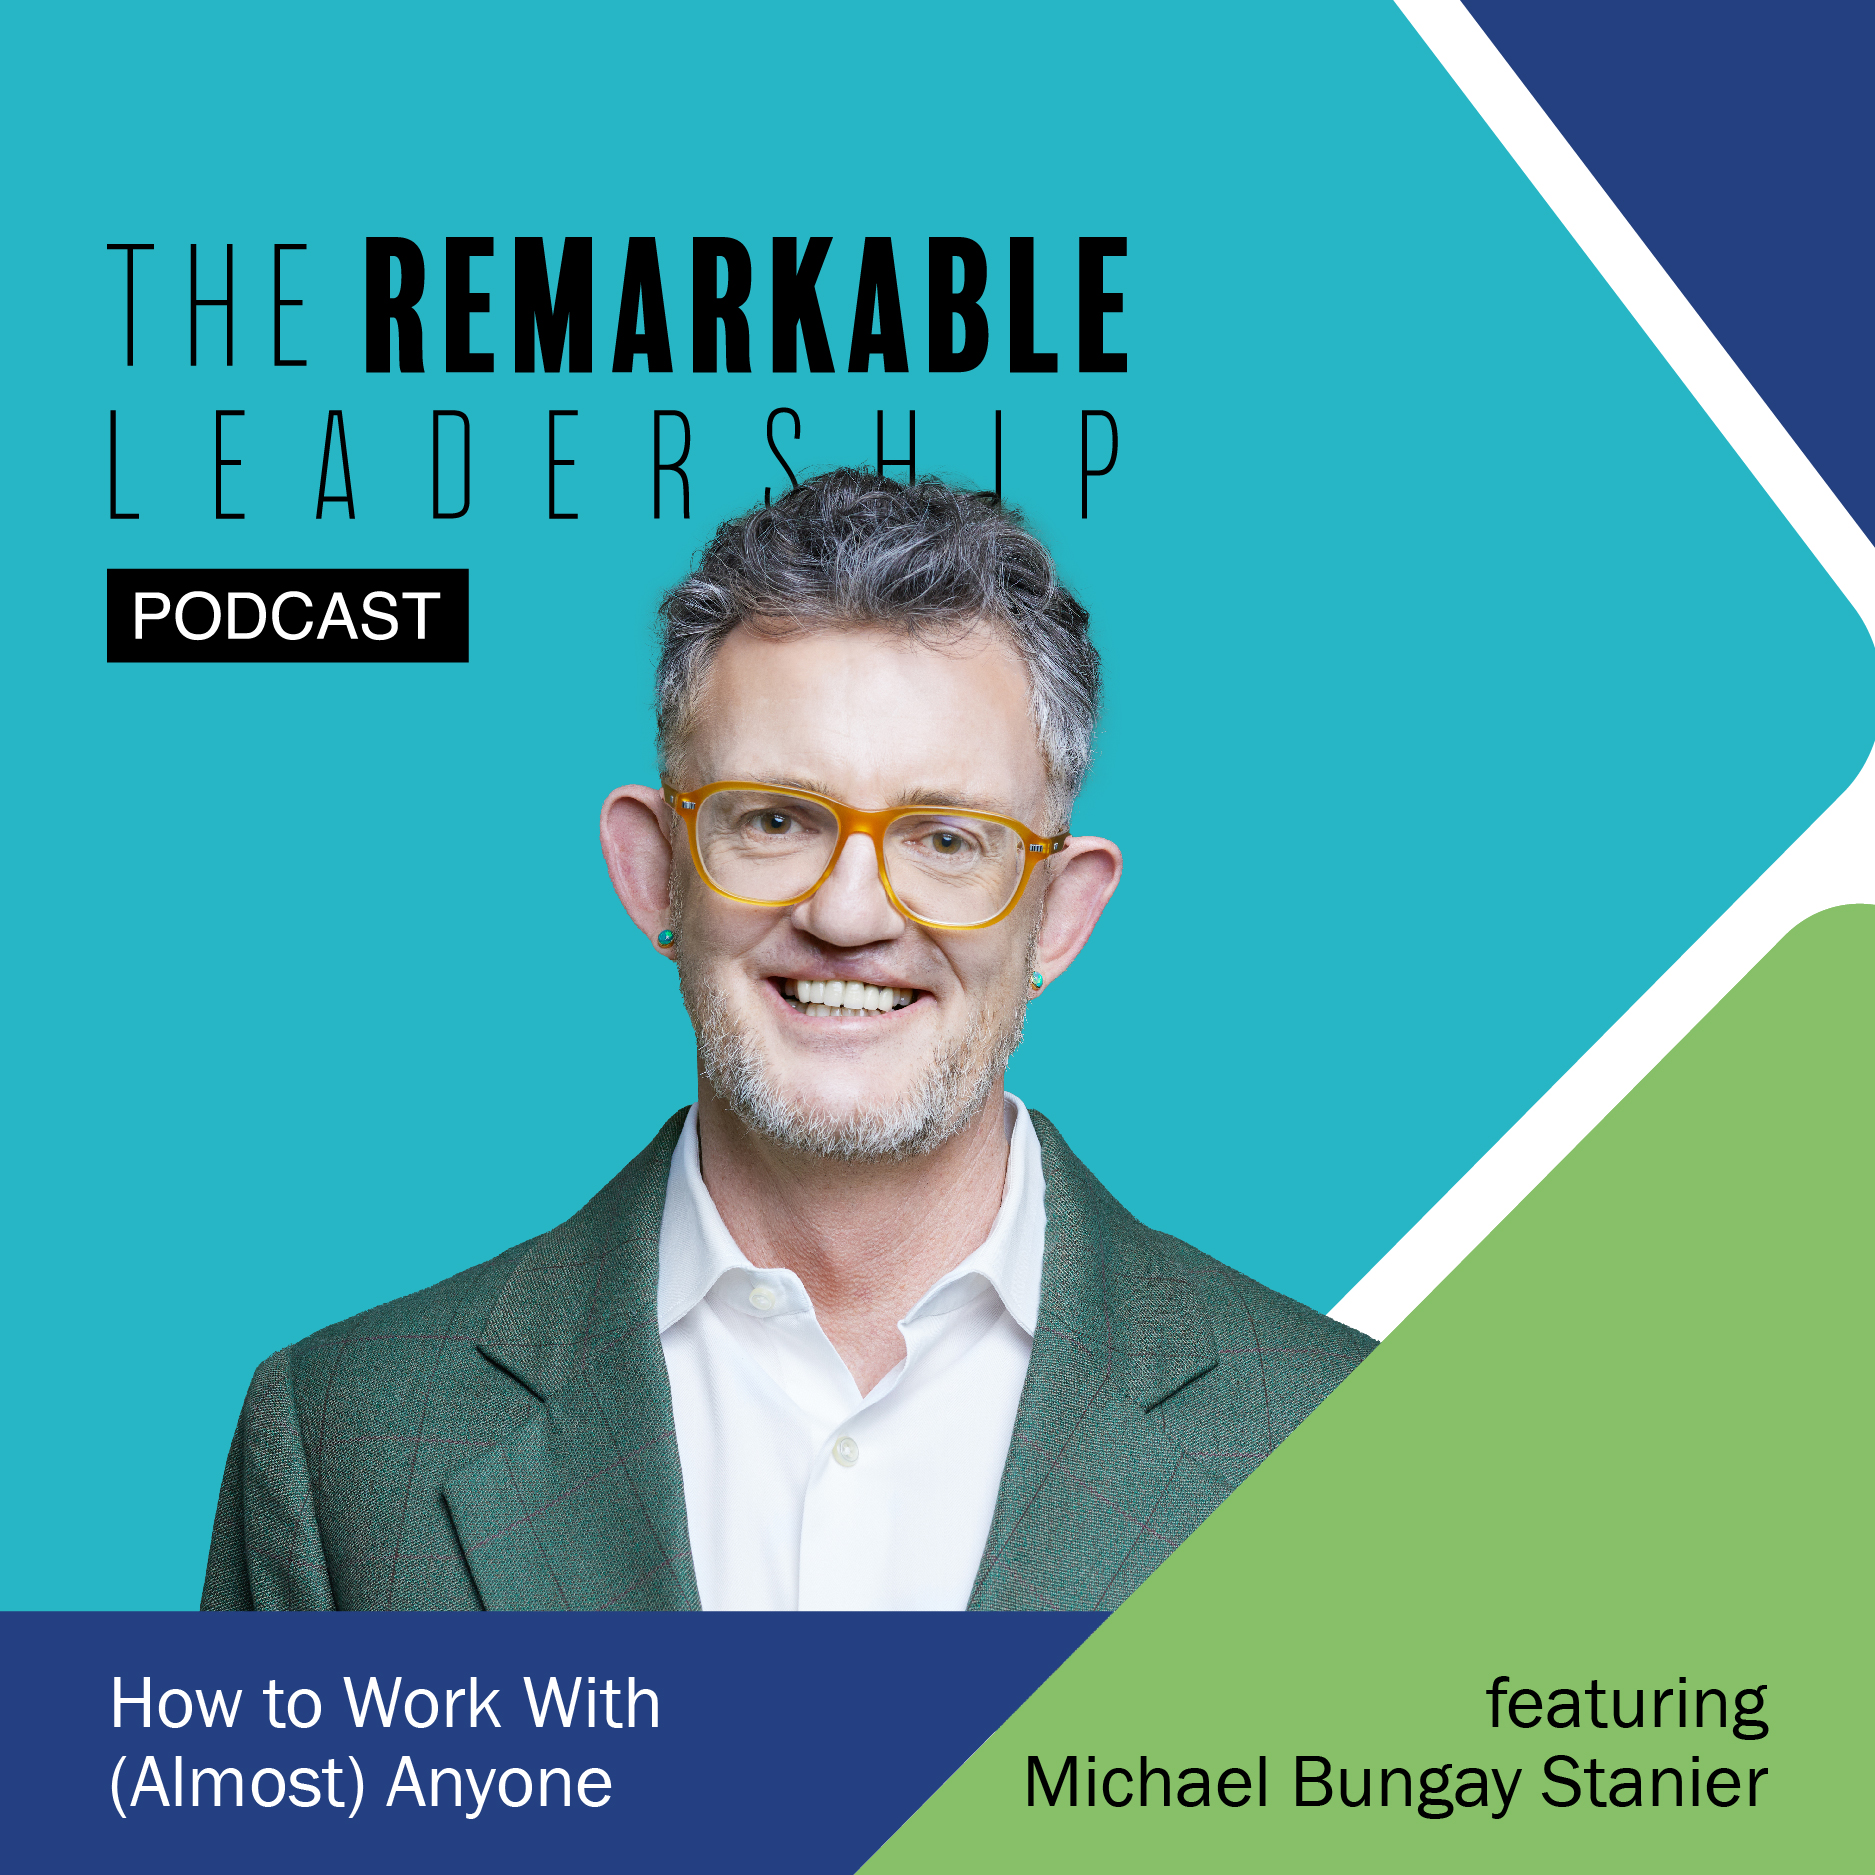 How to Work With (Almost) Anyone with Michael Bungay Stanier